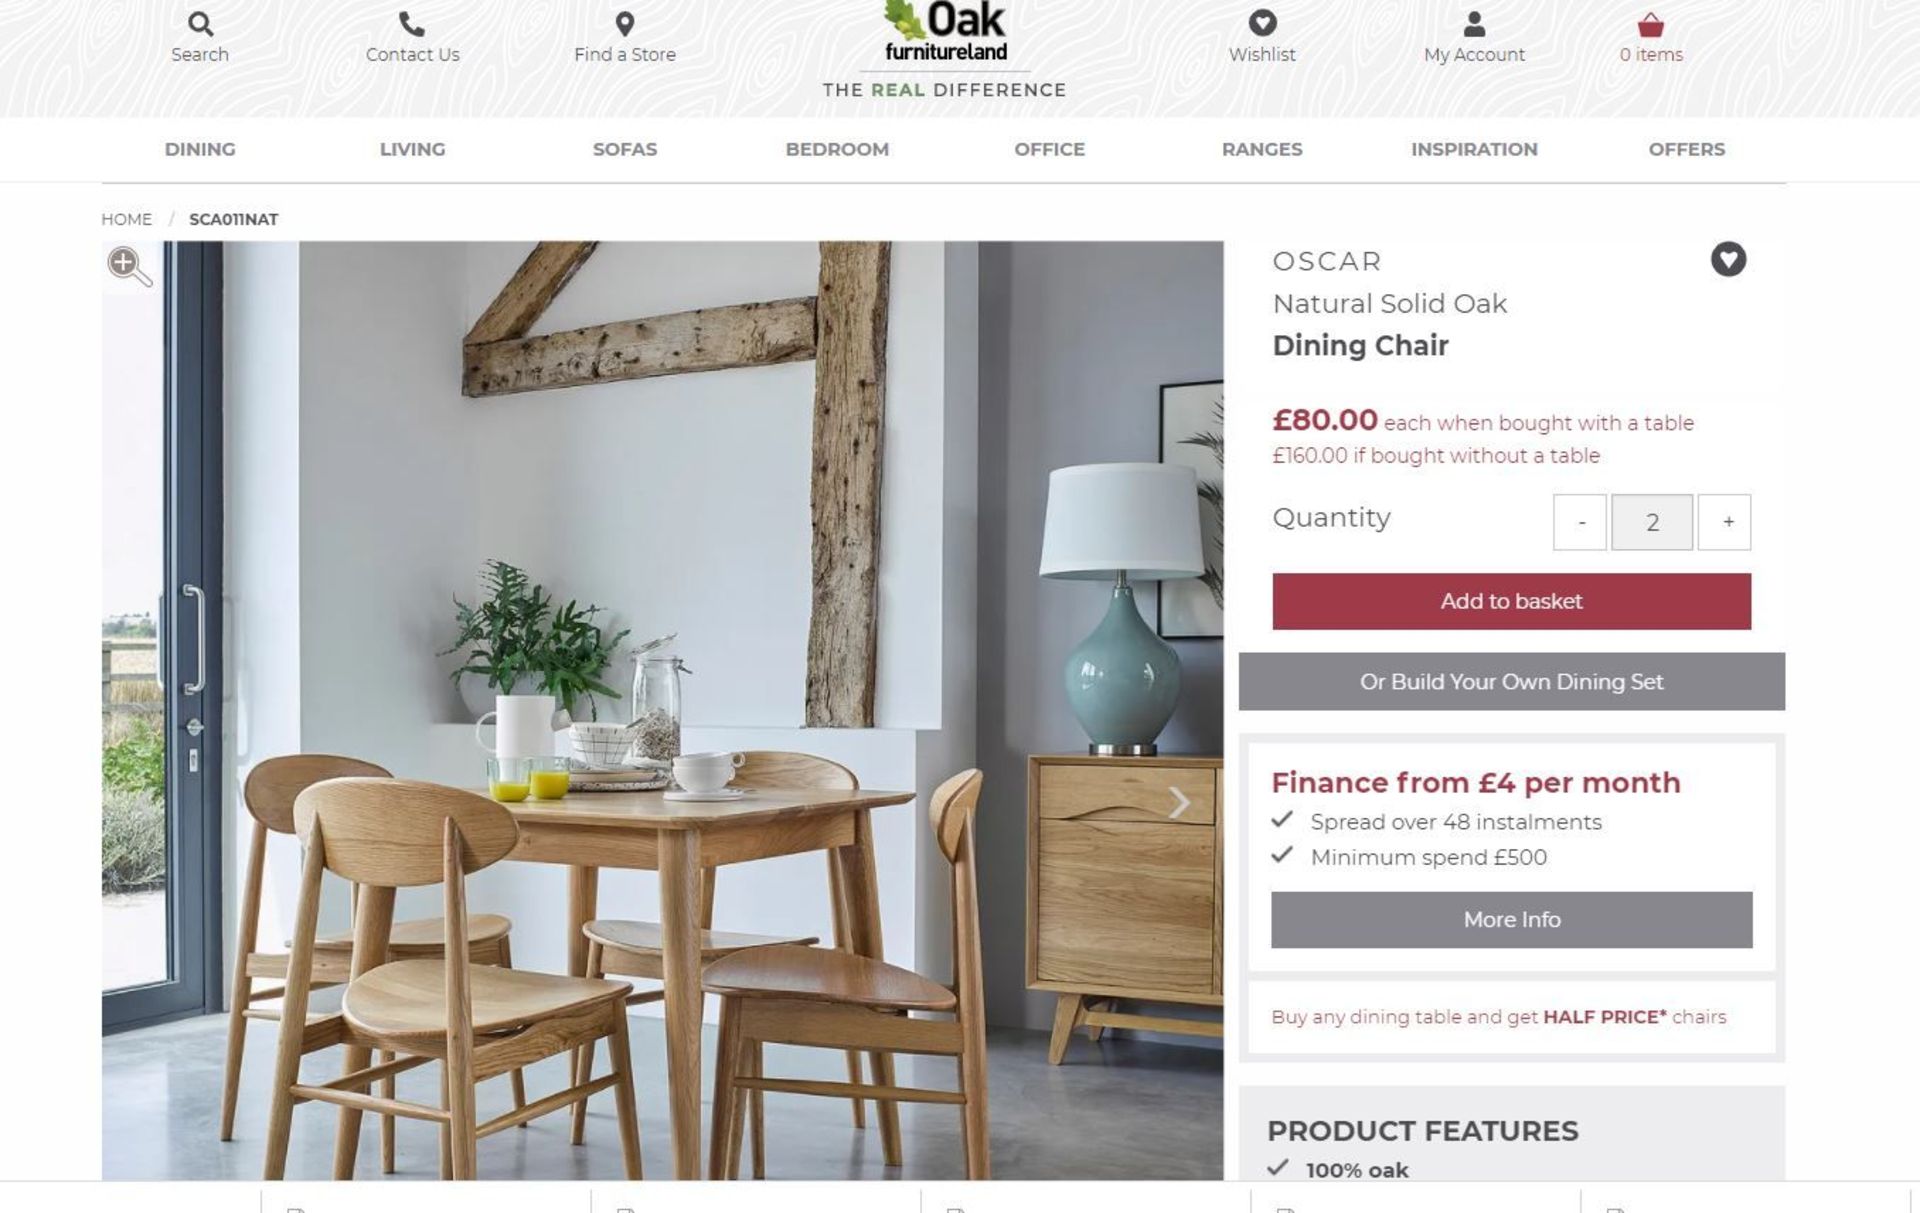 4 X NEW BOXED OSCAR SOLID OAK DINING CHAIRS. SET RRP £520. With its contemporary, yet versatile